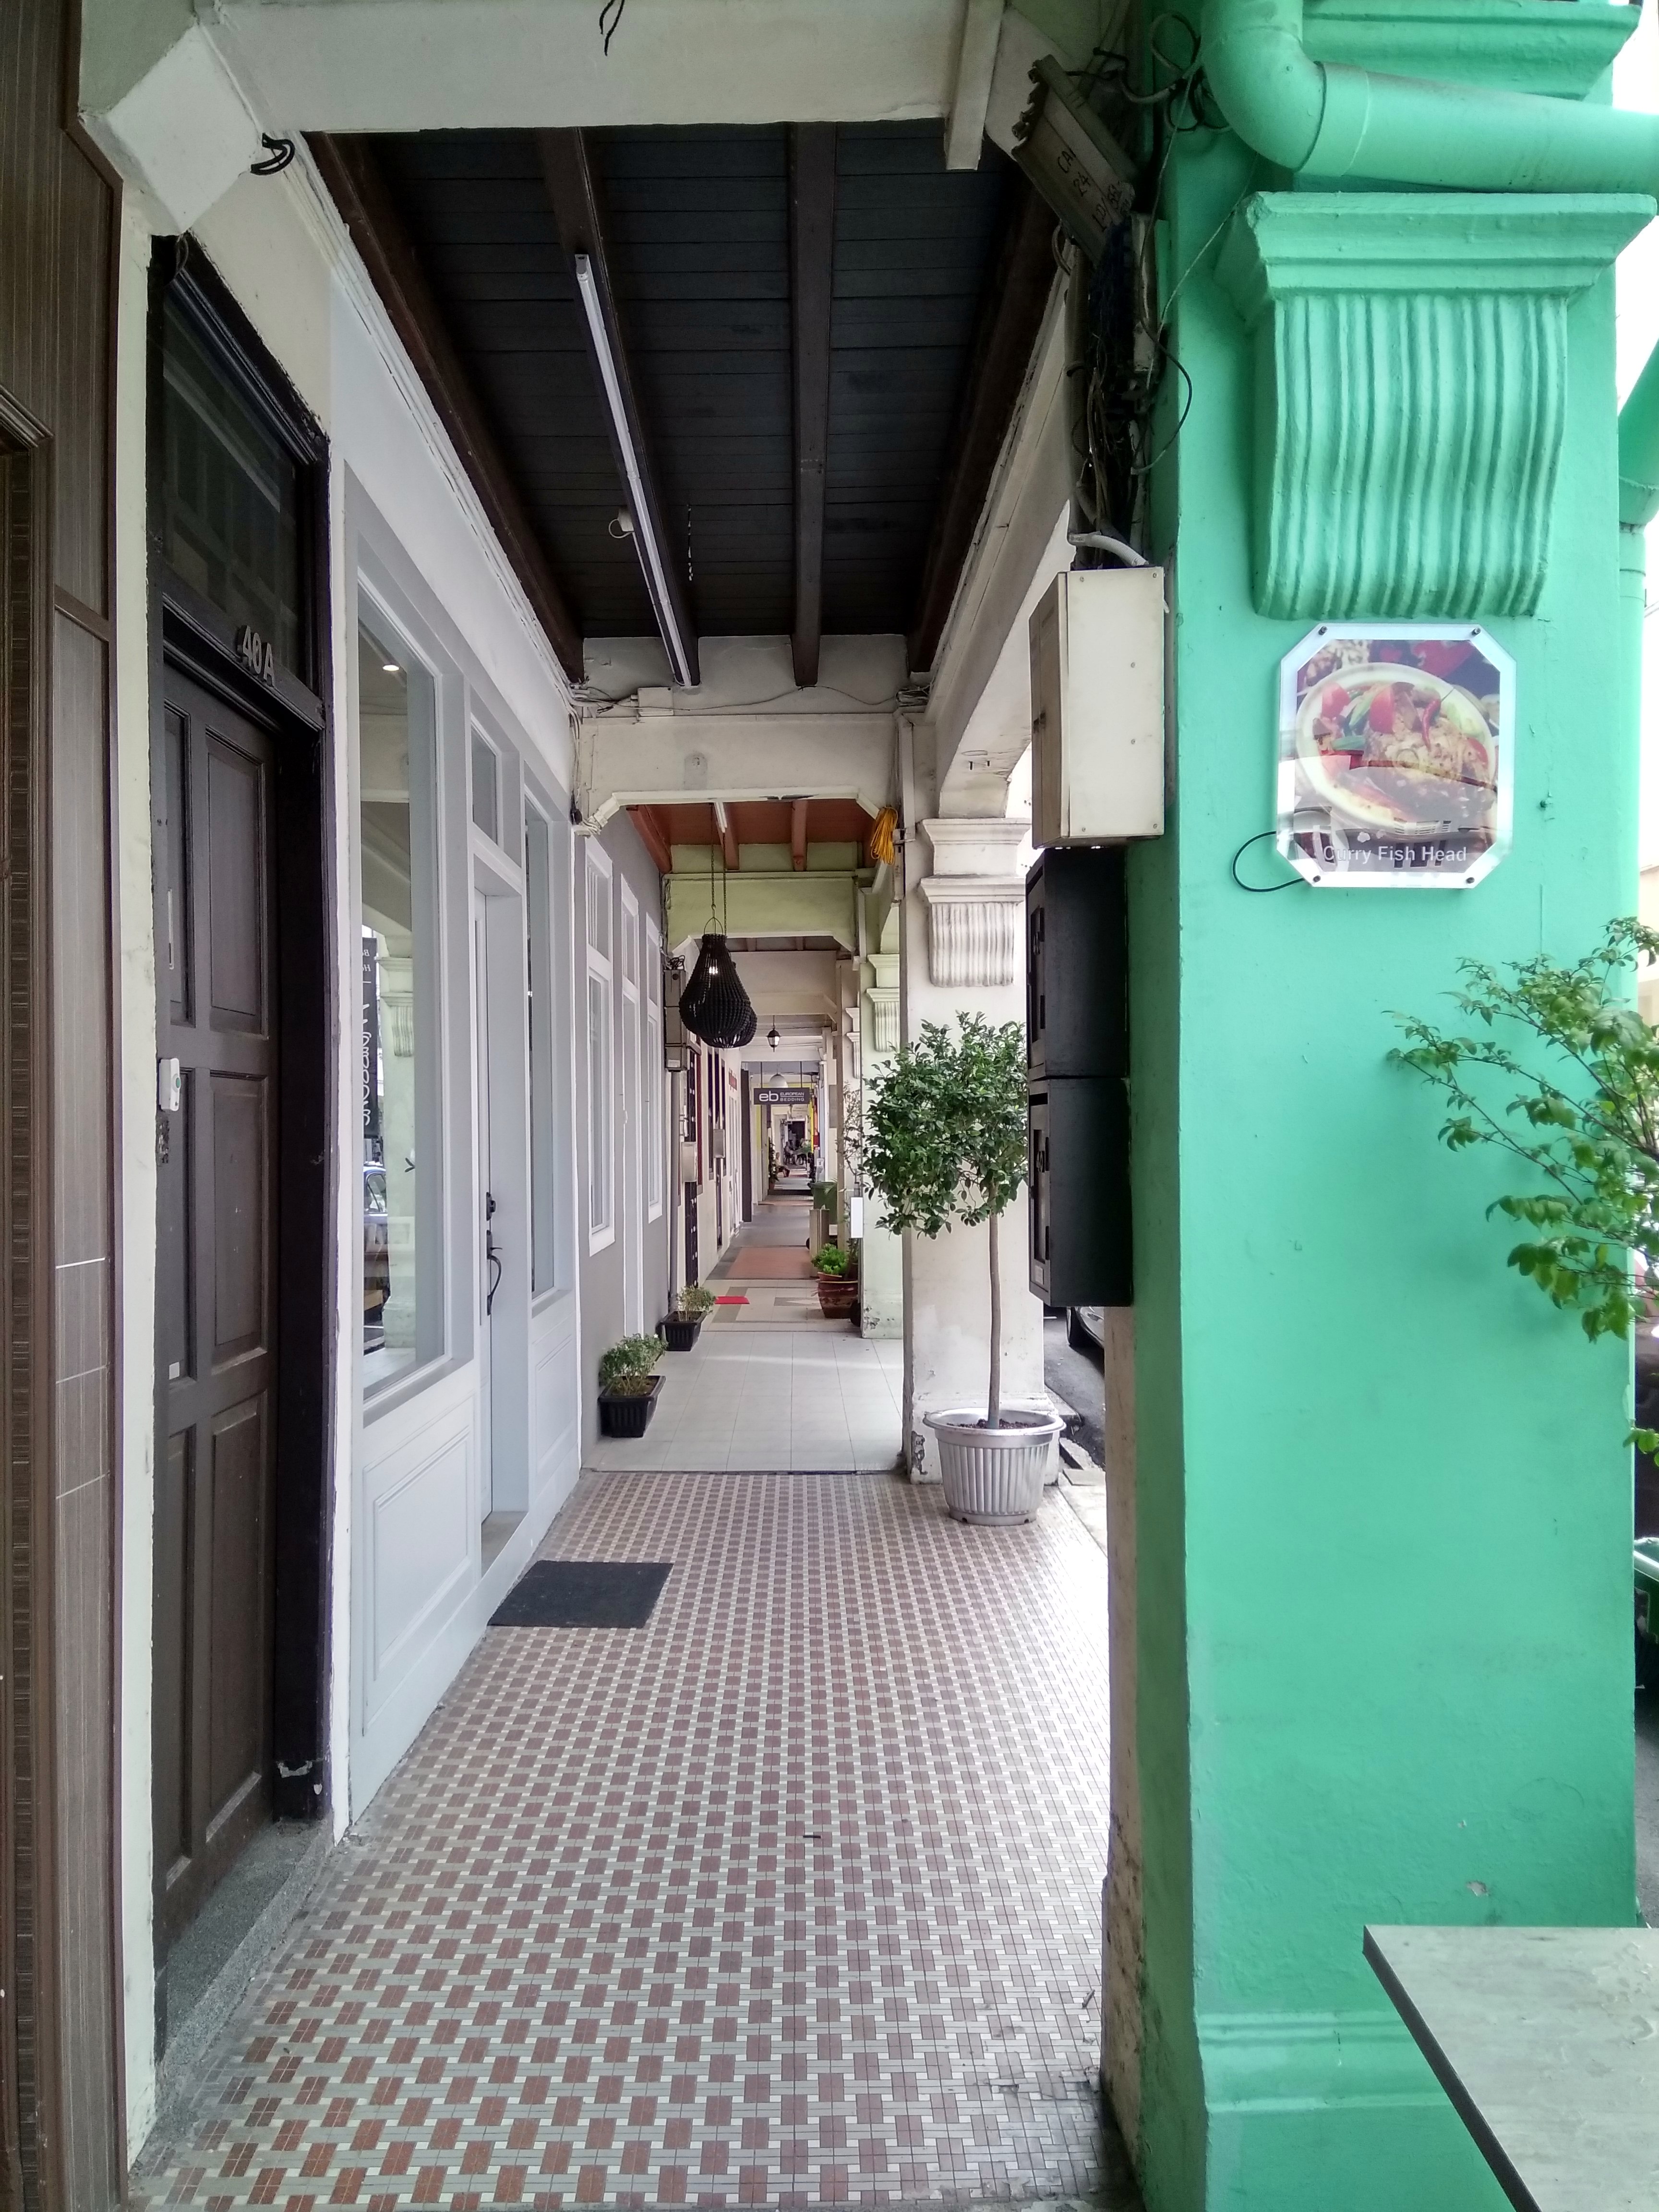 Walkways that host cafes and shops